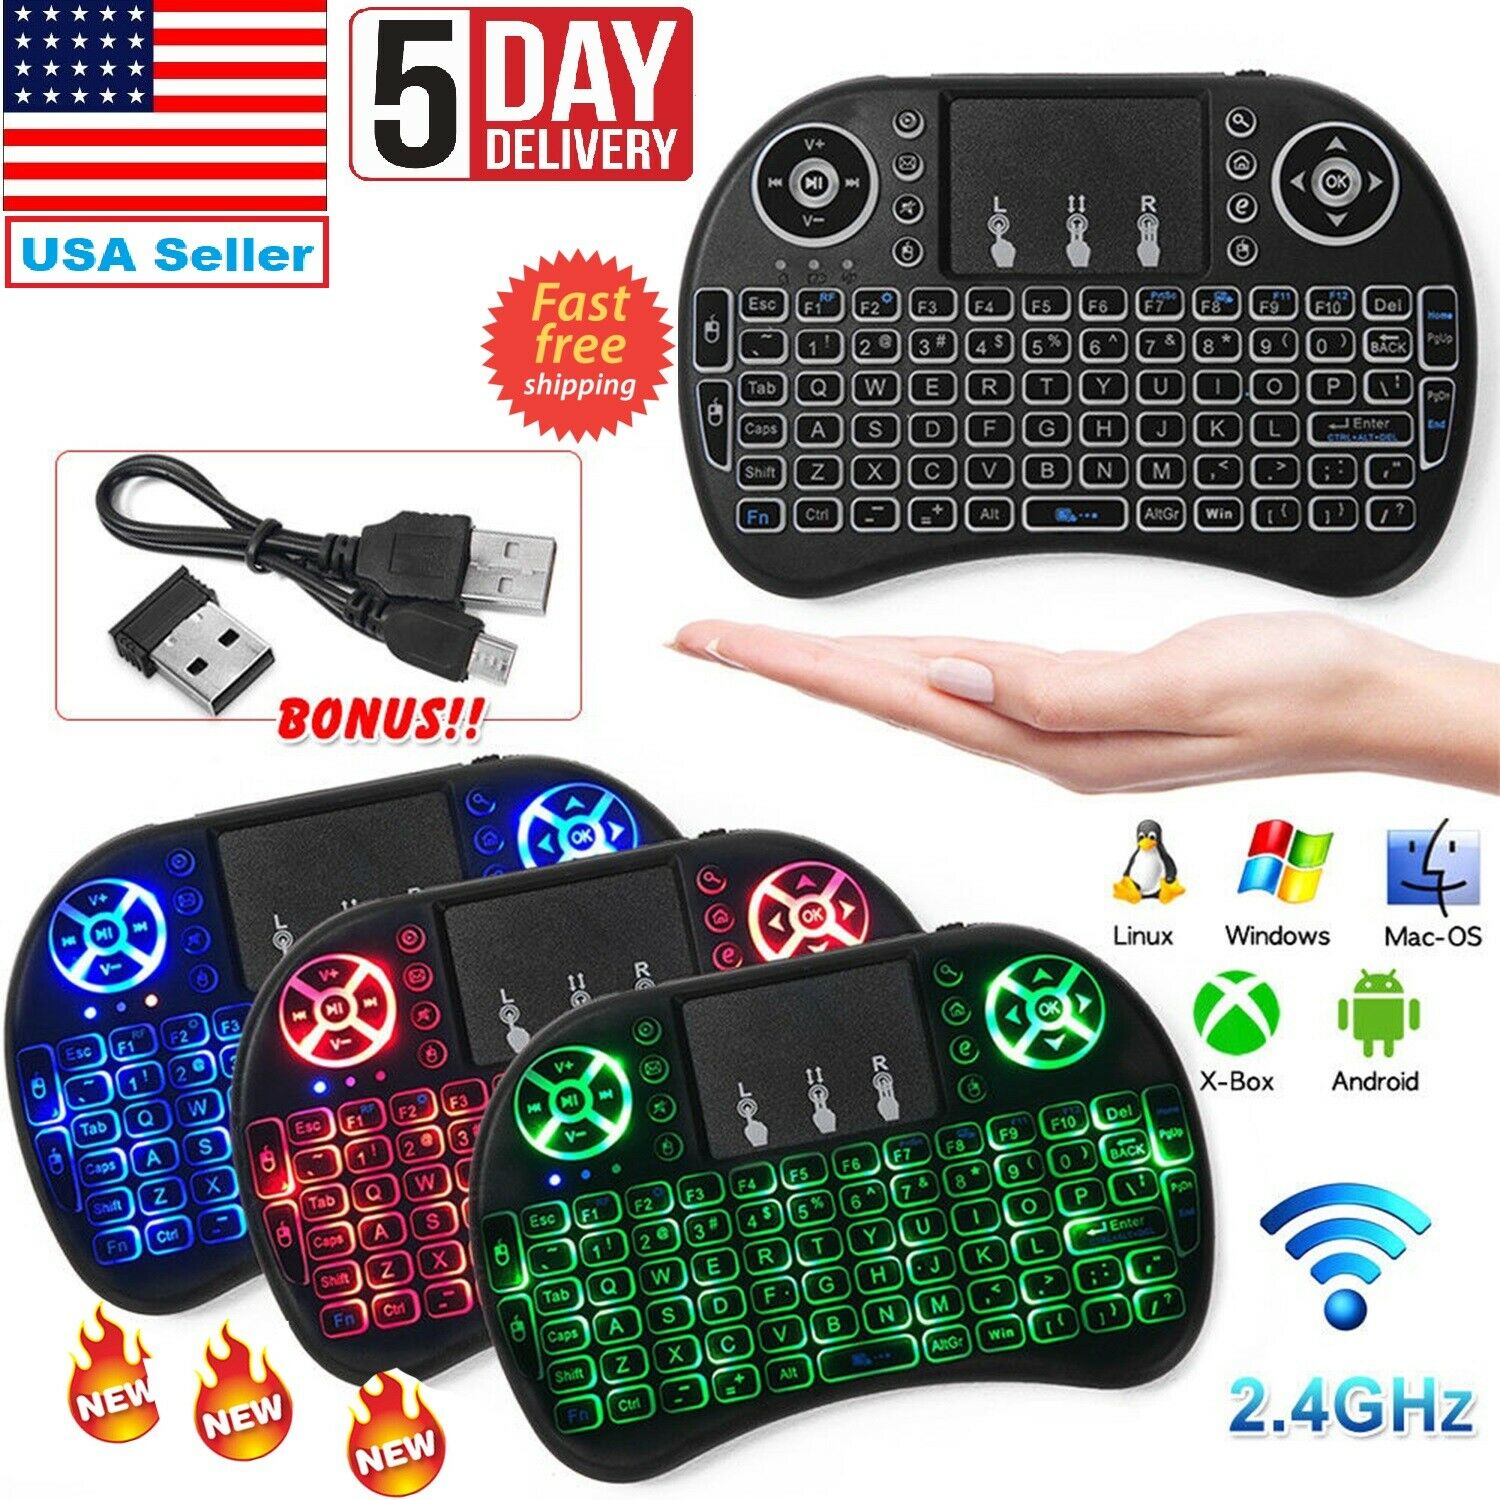 Mini Wireless Remote Keyboard Mouse For Samsung,lg Smart Tv,android,tablet,pc